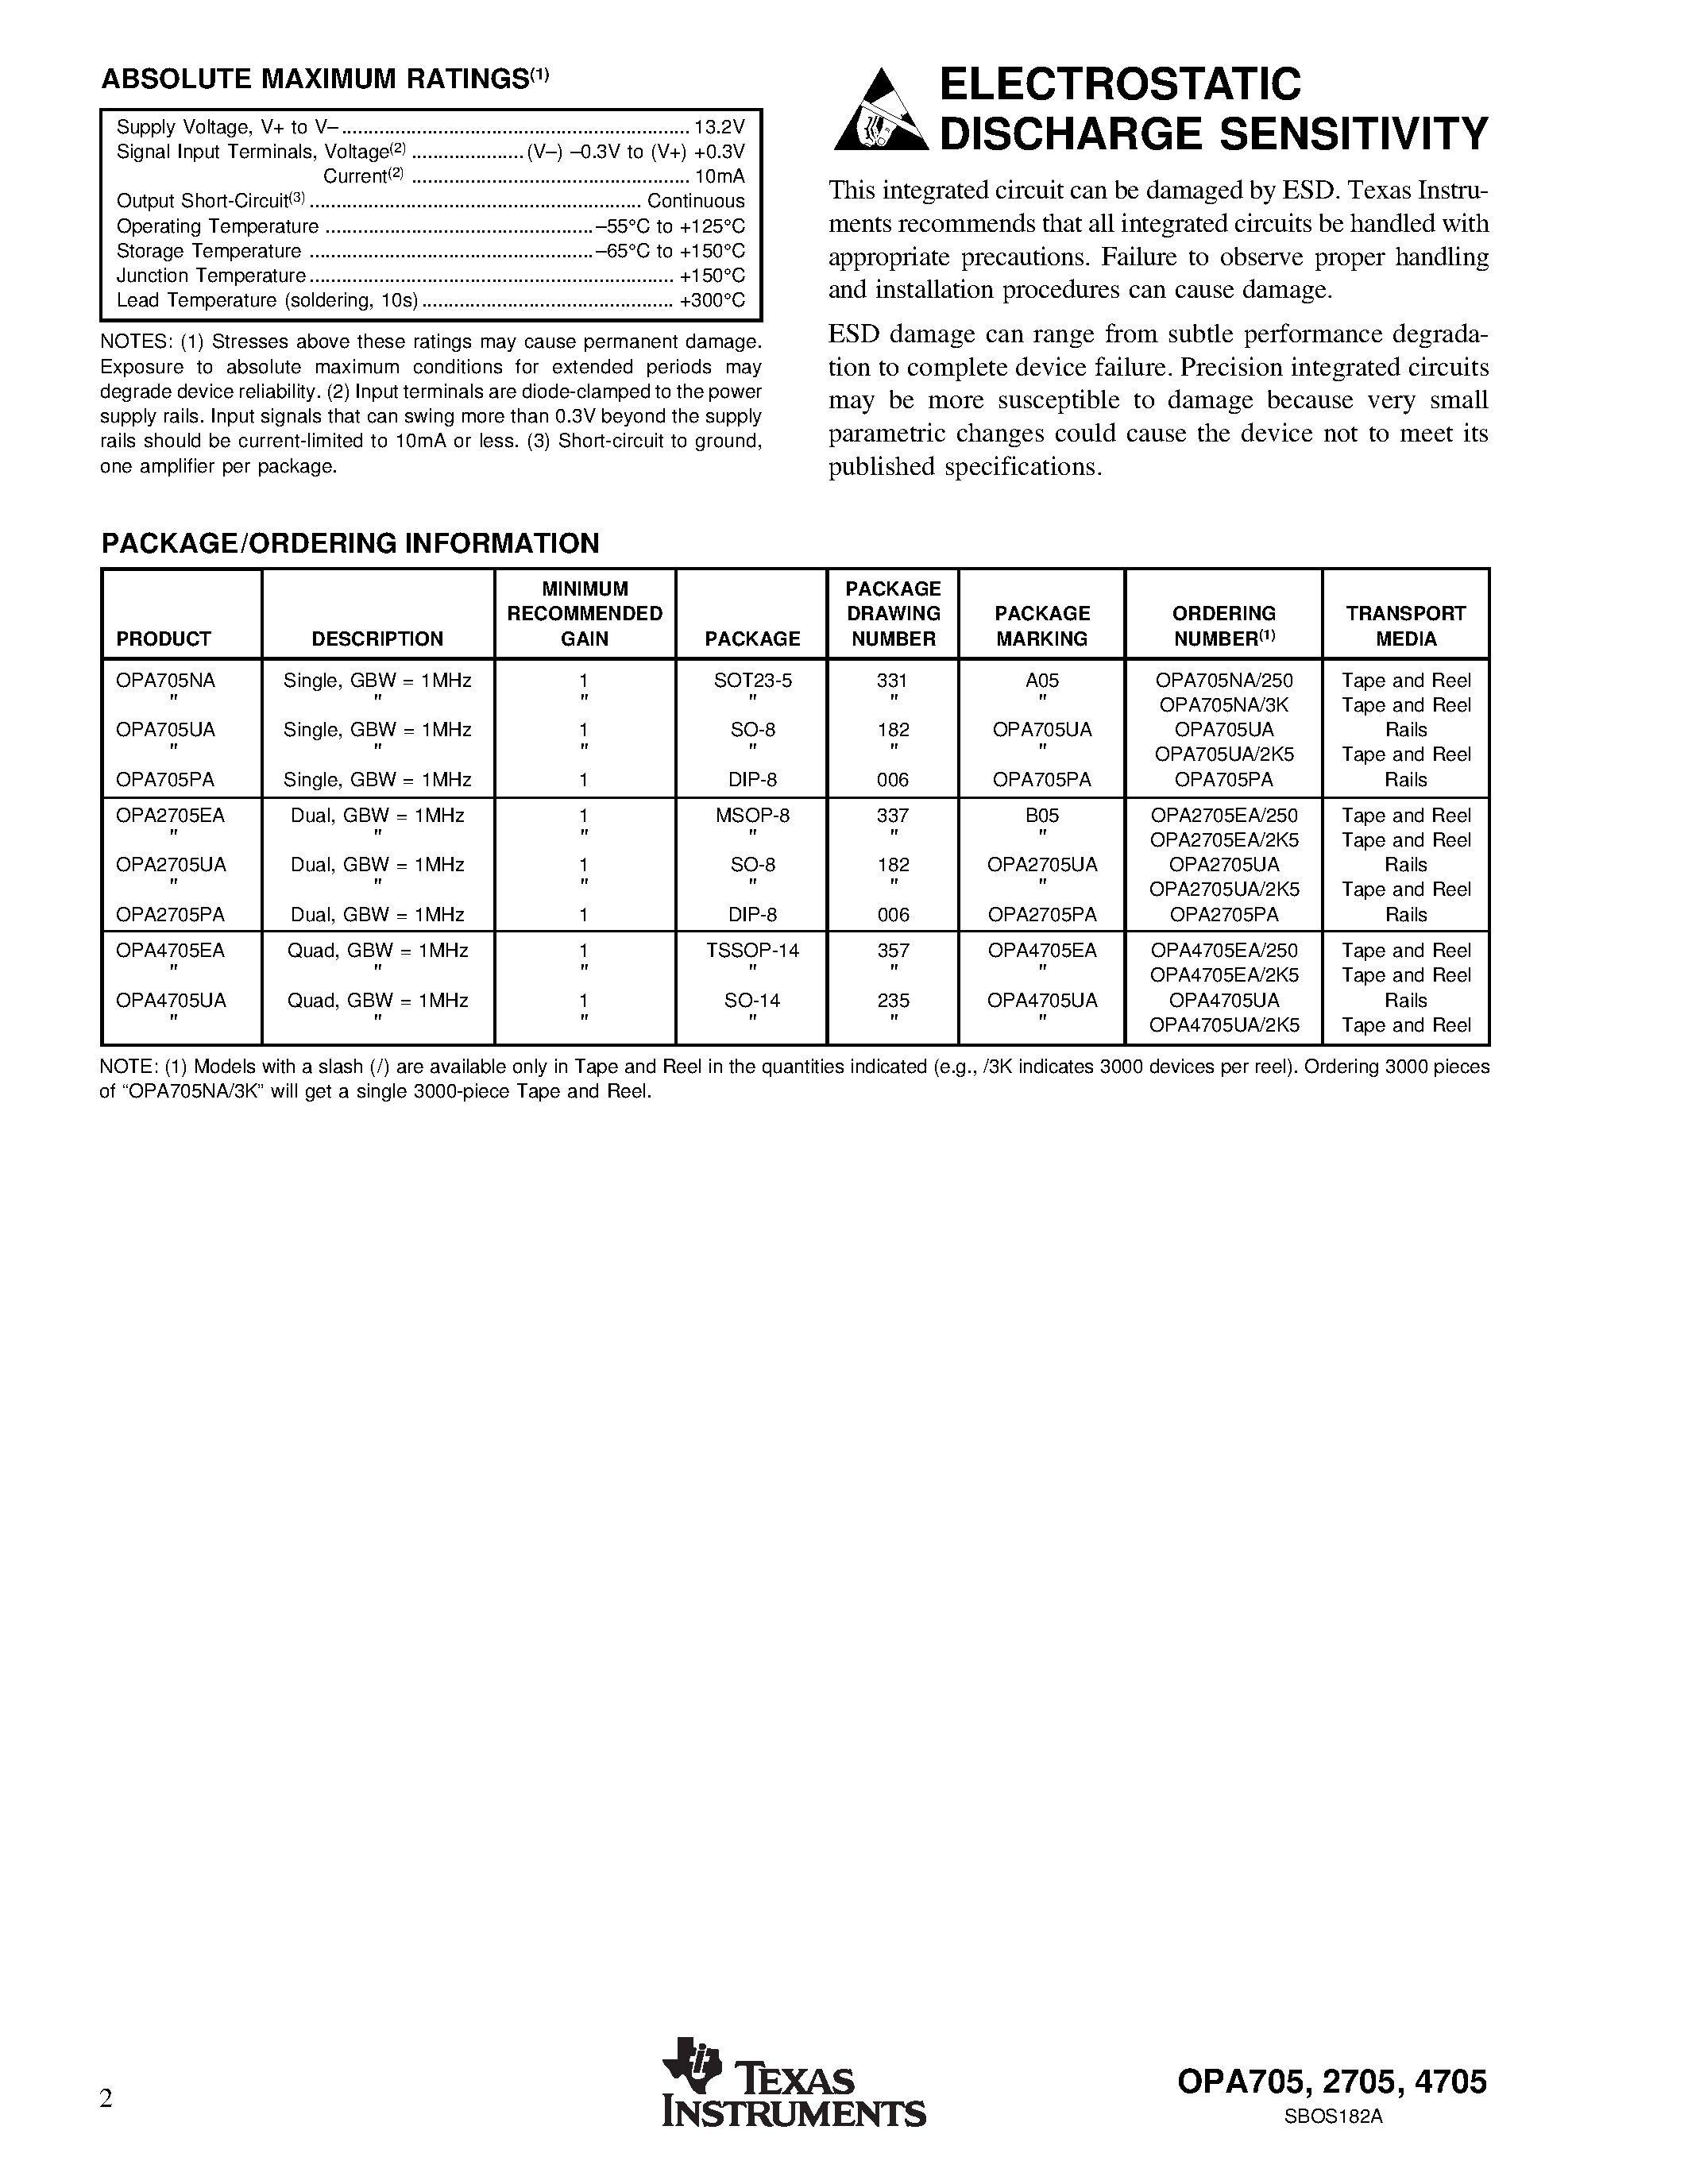 Datasheet OPA2705 - Low-Cost / CMOS / Rail-to-Rail / I/O OPERATIONAL AMPLIFIERS page 2